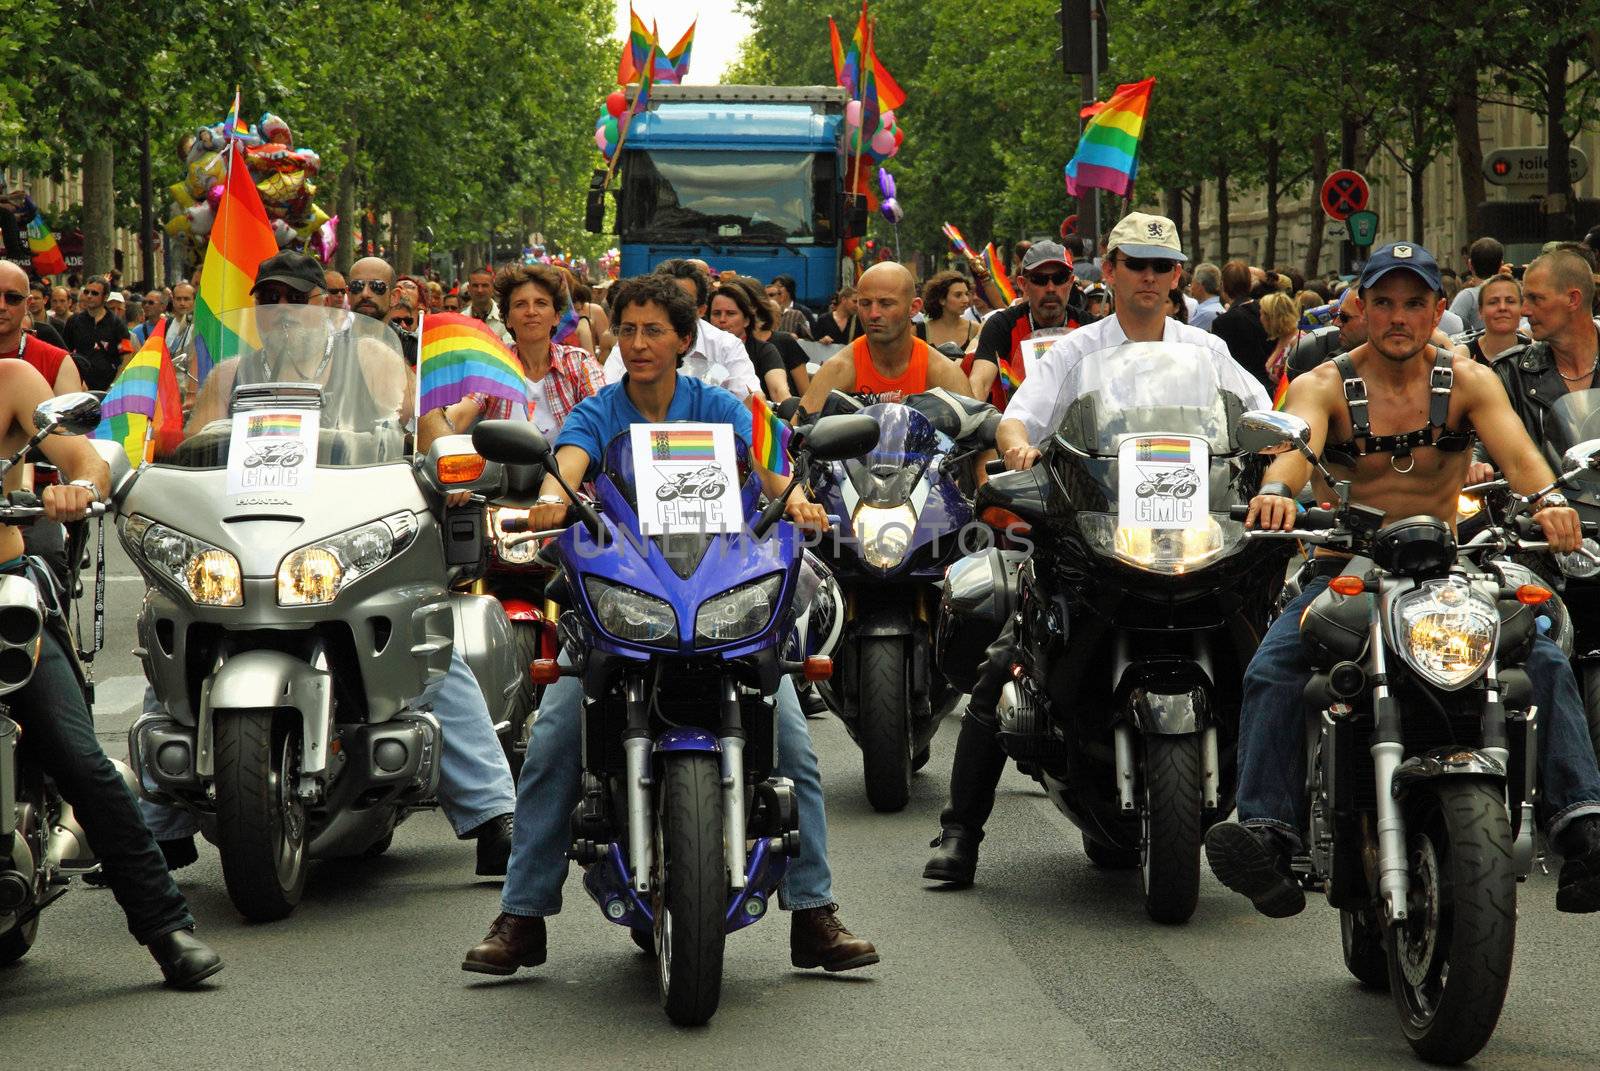 PARIS - JUNE 27: Motorcyclists lead the annual Marche des Fiertes (Gay Pride parade) June 27, 2009 in Paris, France. En route from Montparnasse to Bastille, this year’s event attracted half a million spectators and participants, including guest celebrity Lisa Minelli. 